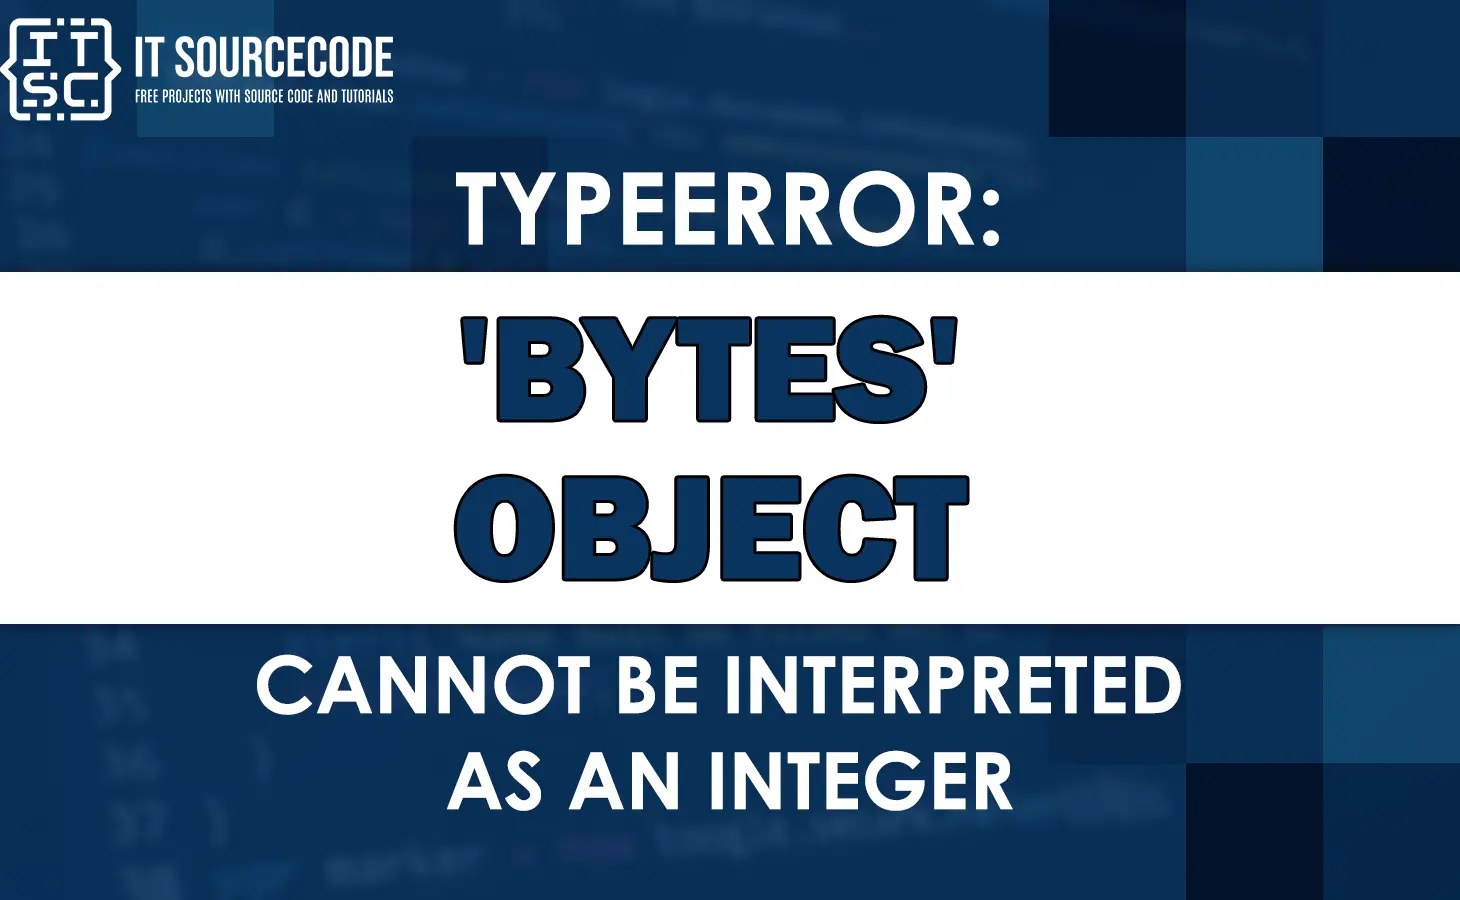 typeerror: 'bytes' object cannot be interpreted as an integer